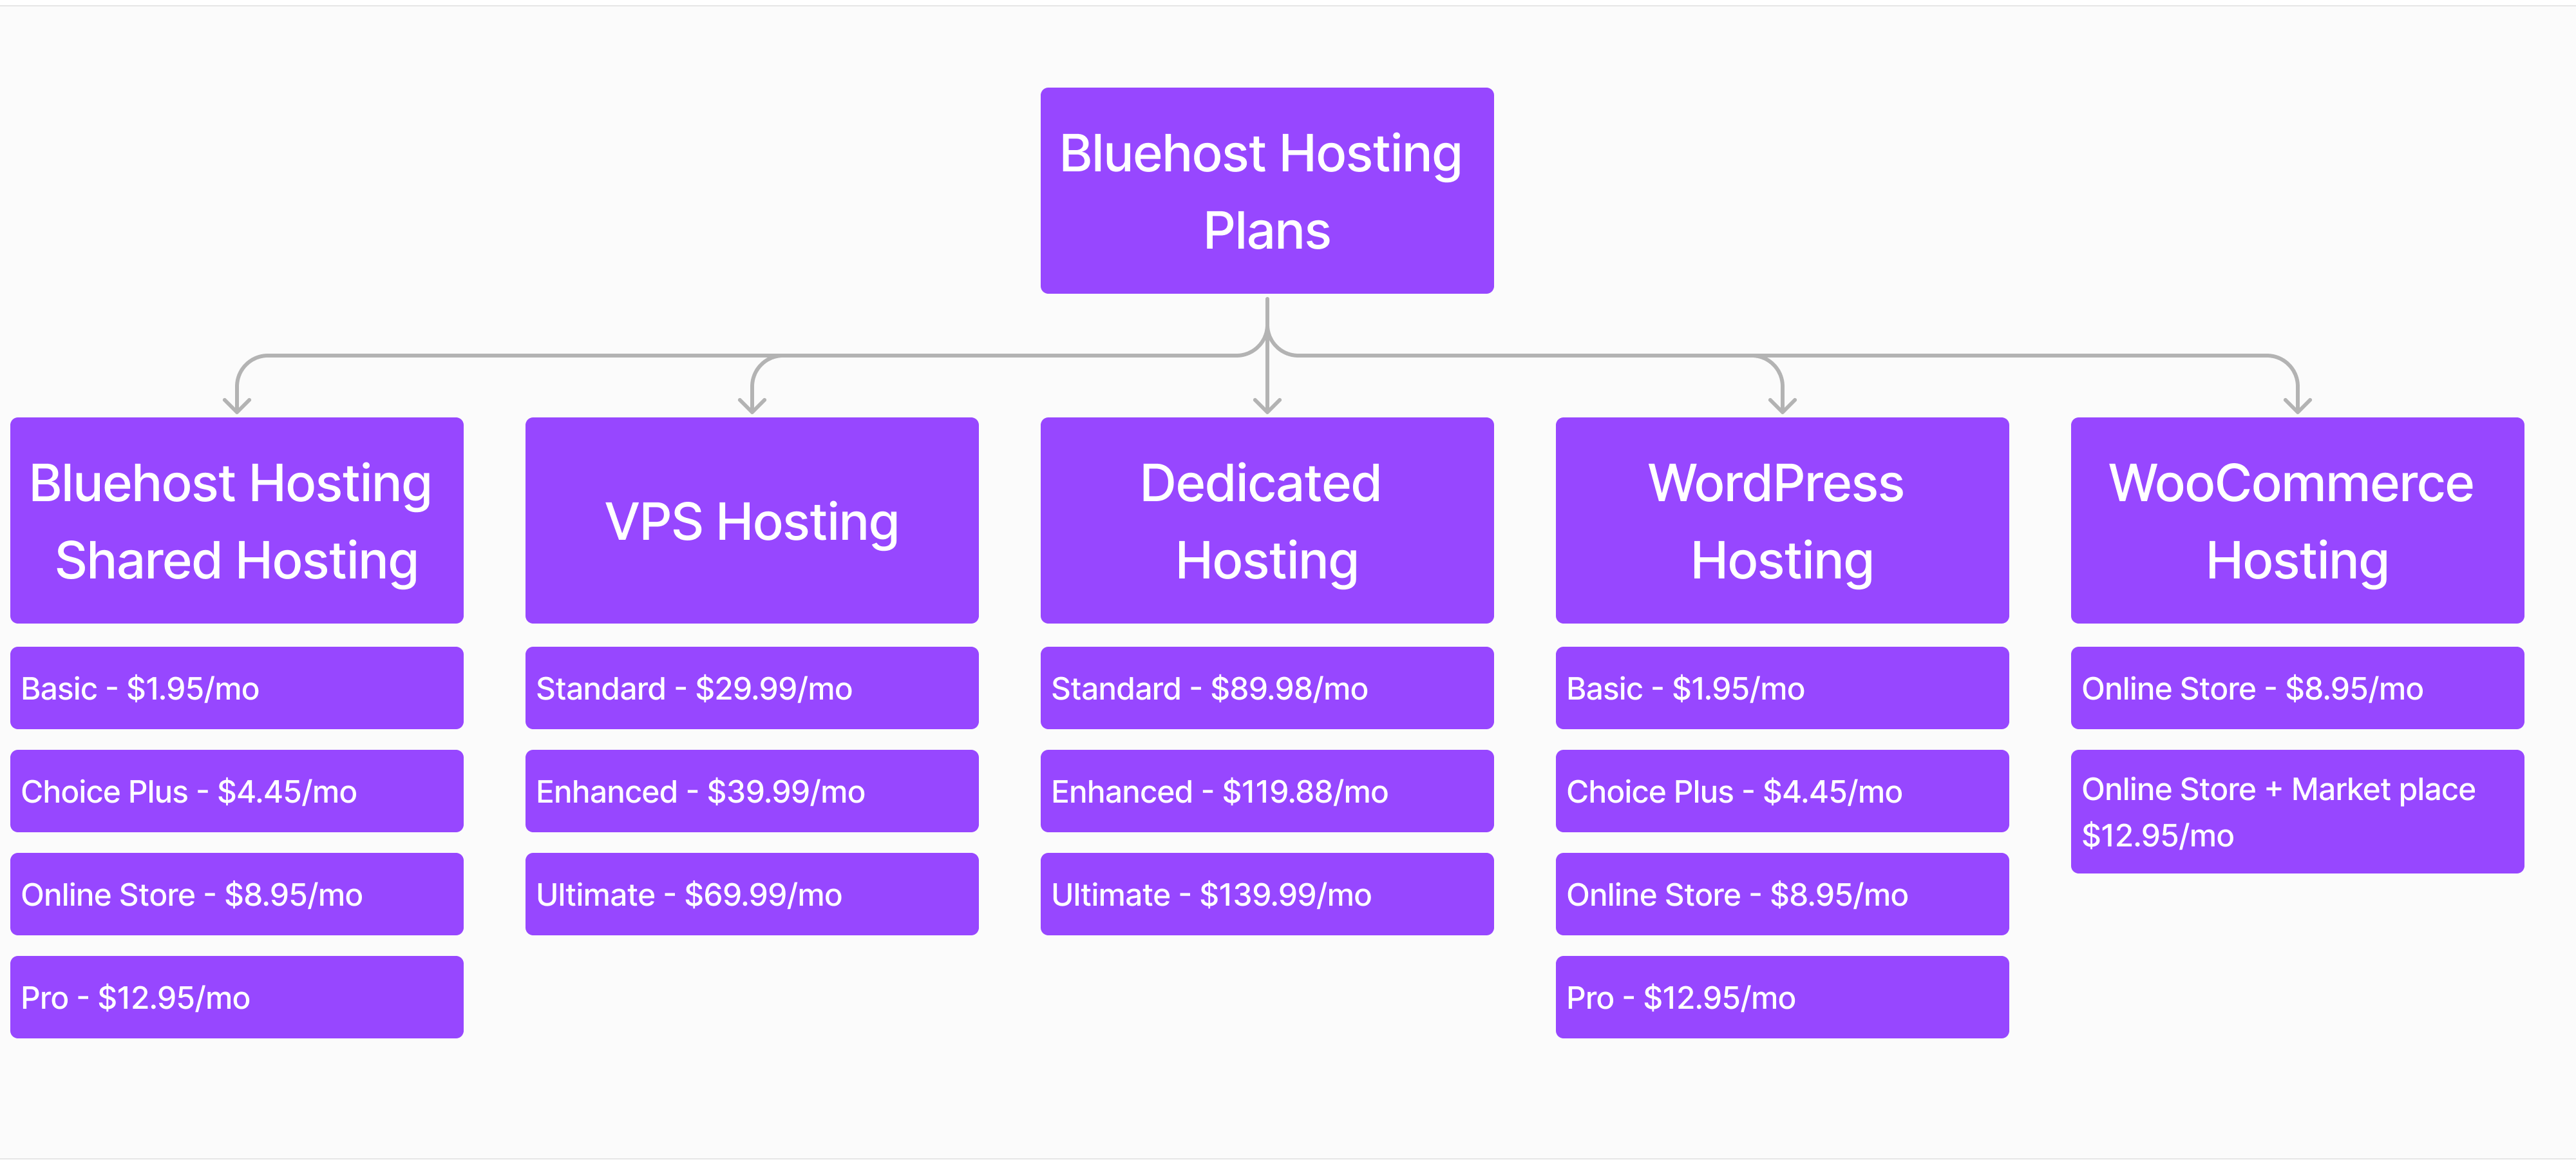 Bluehost Review: Overview of all plans